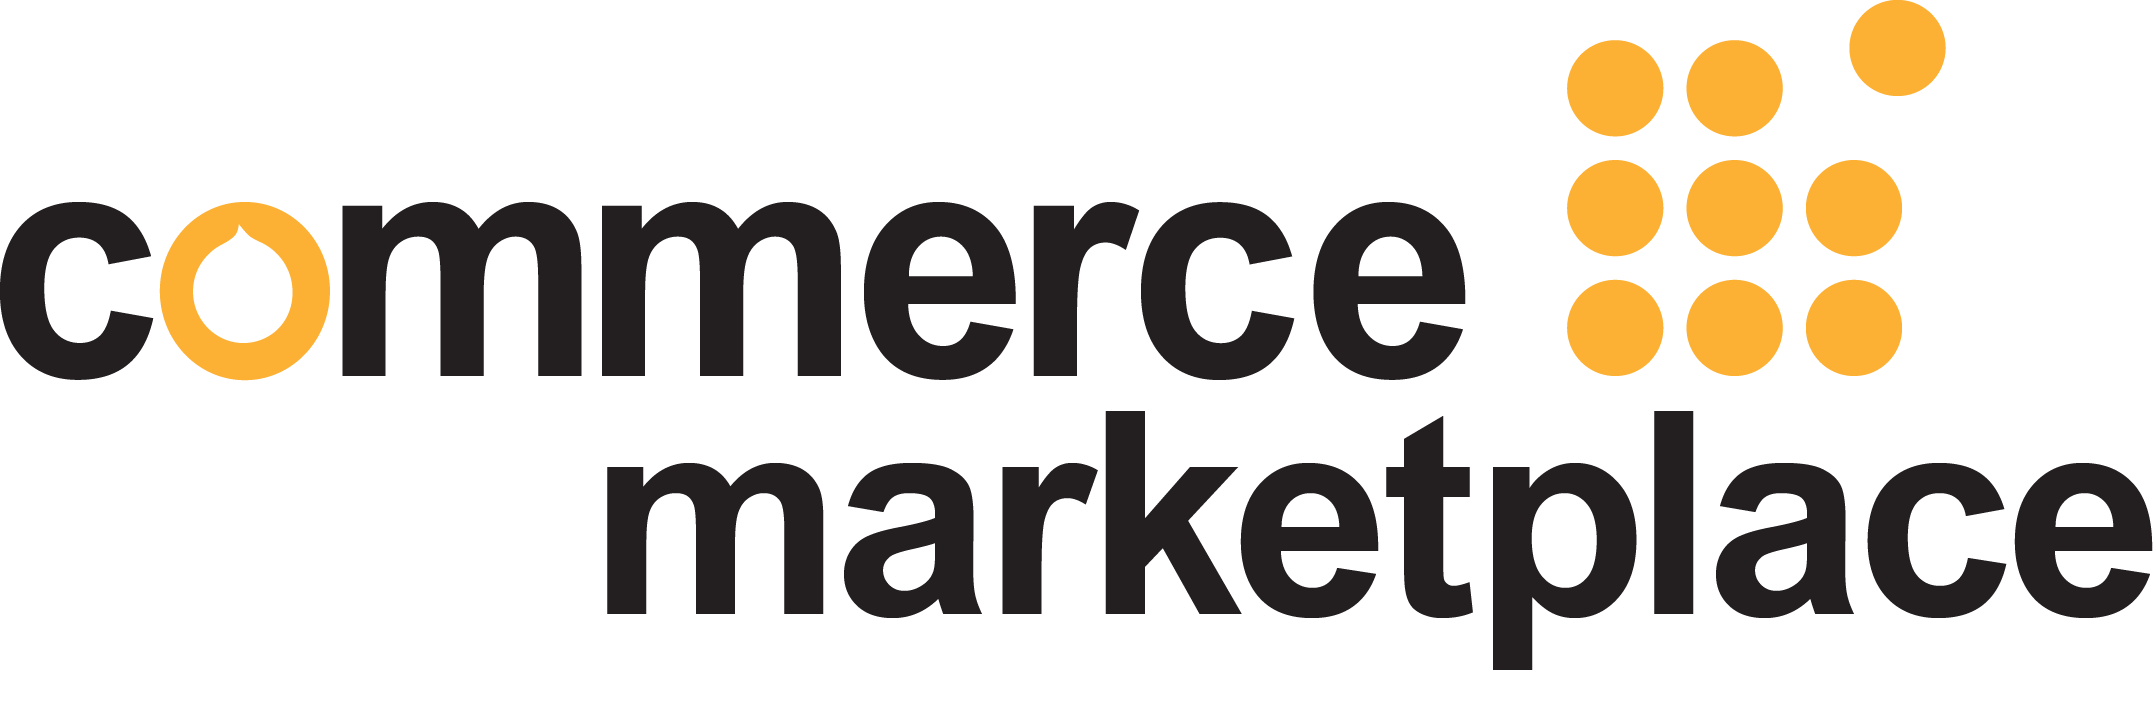 Download PNG image - Marketplace PNG Pic 